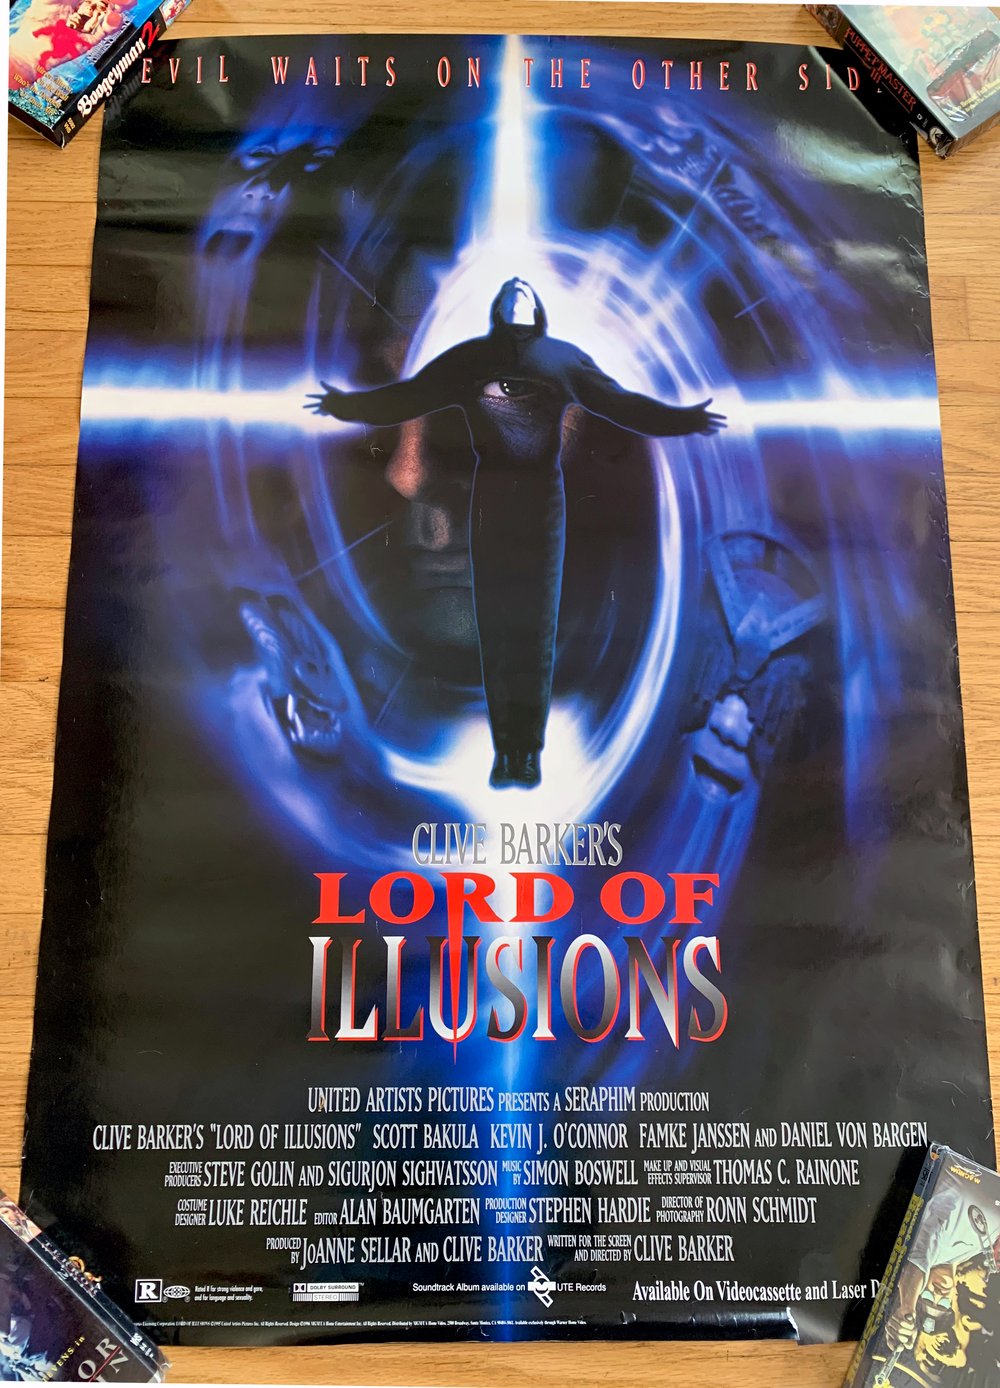 1995 LORD OF ILLUSIONS Original MGM Home Video Promotional Poster